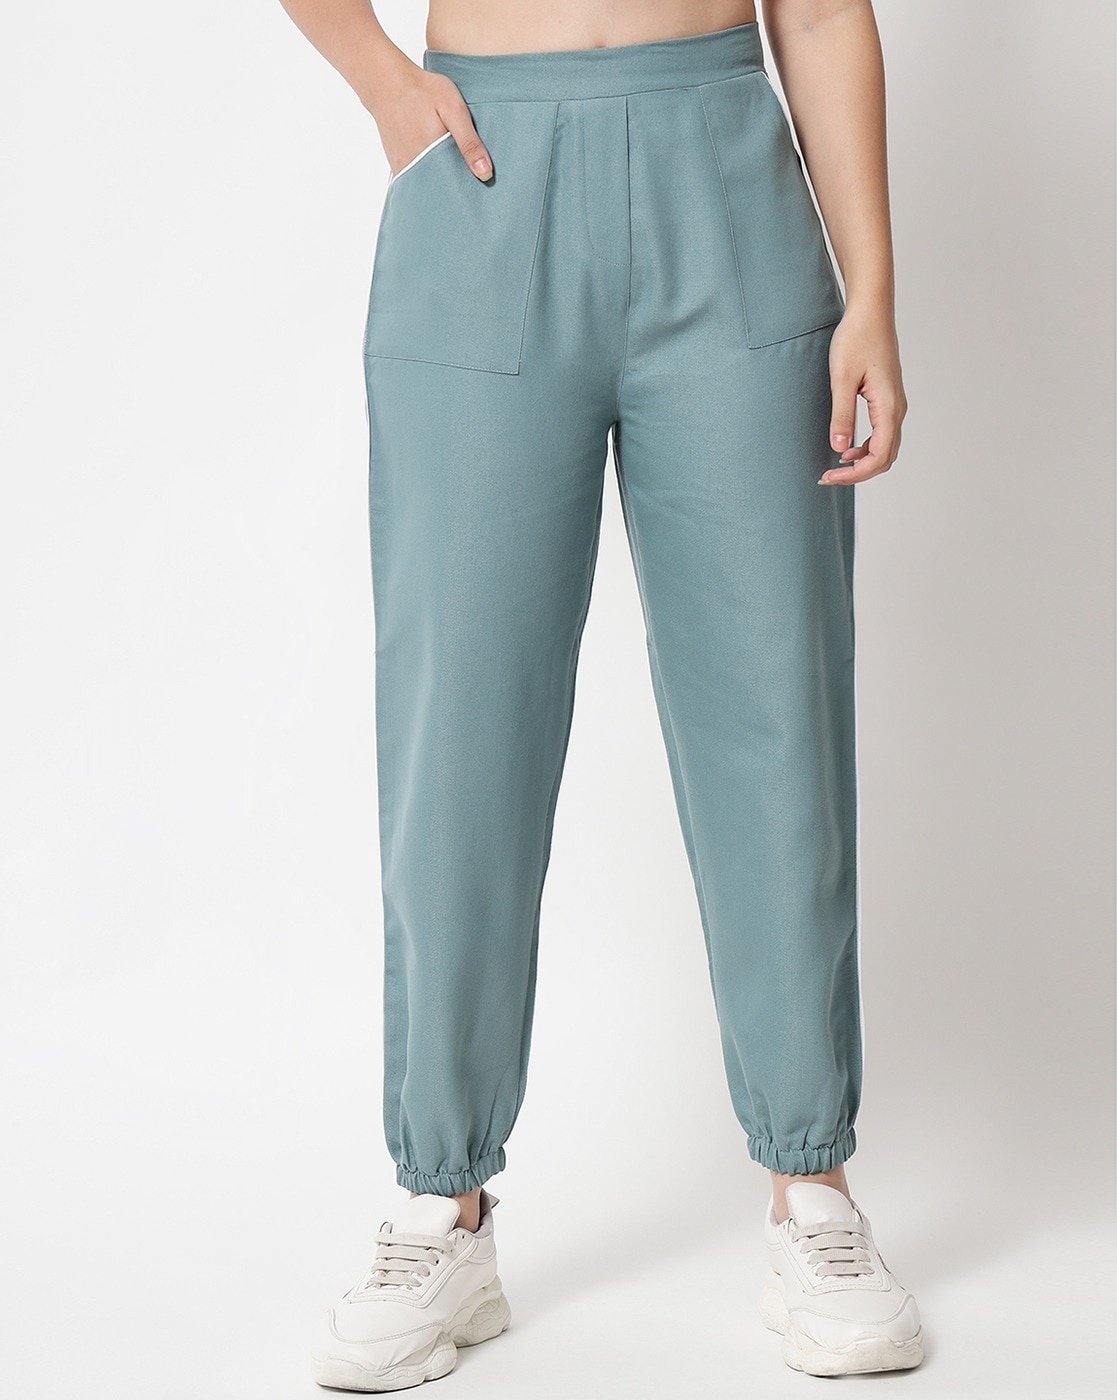 Buy Green Trousers & Pants for Women by ORCHID BLUES Online